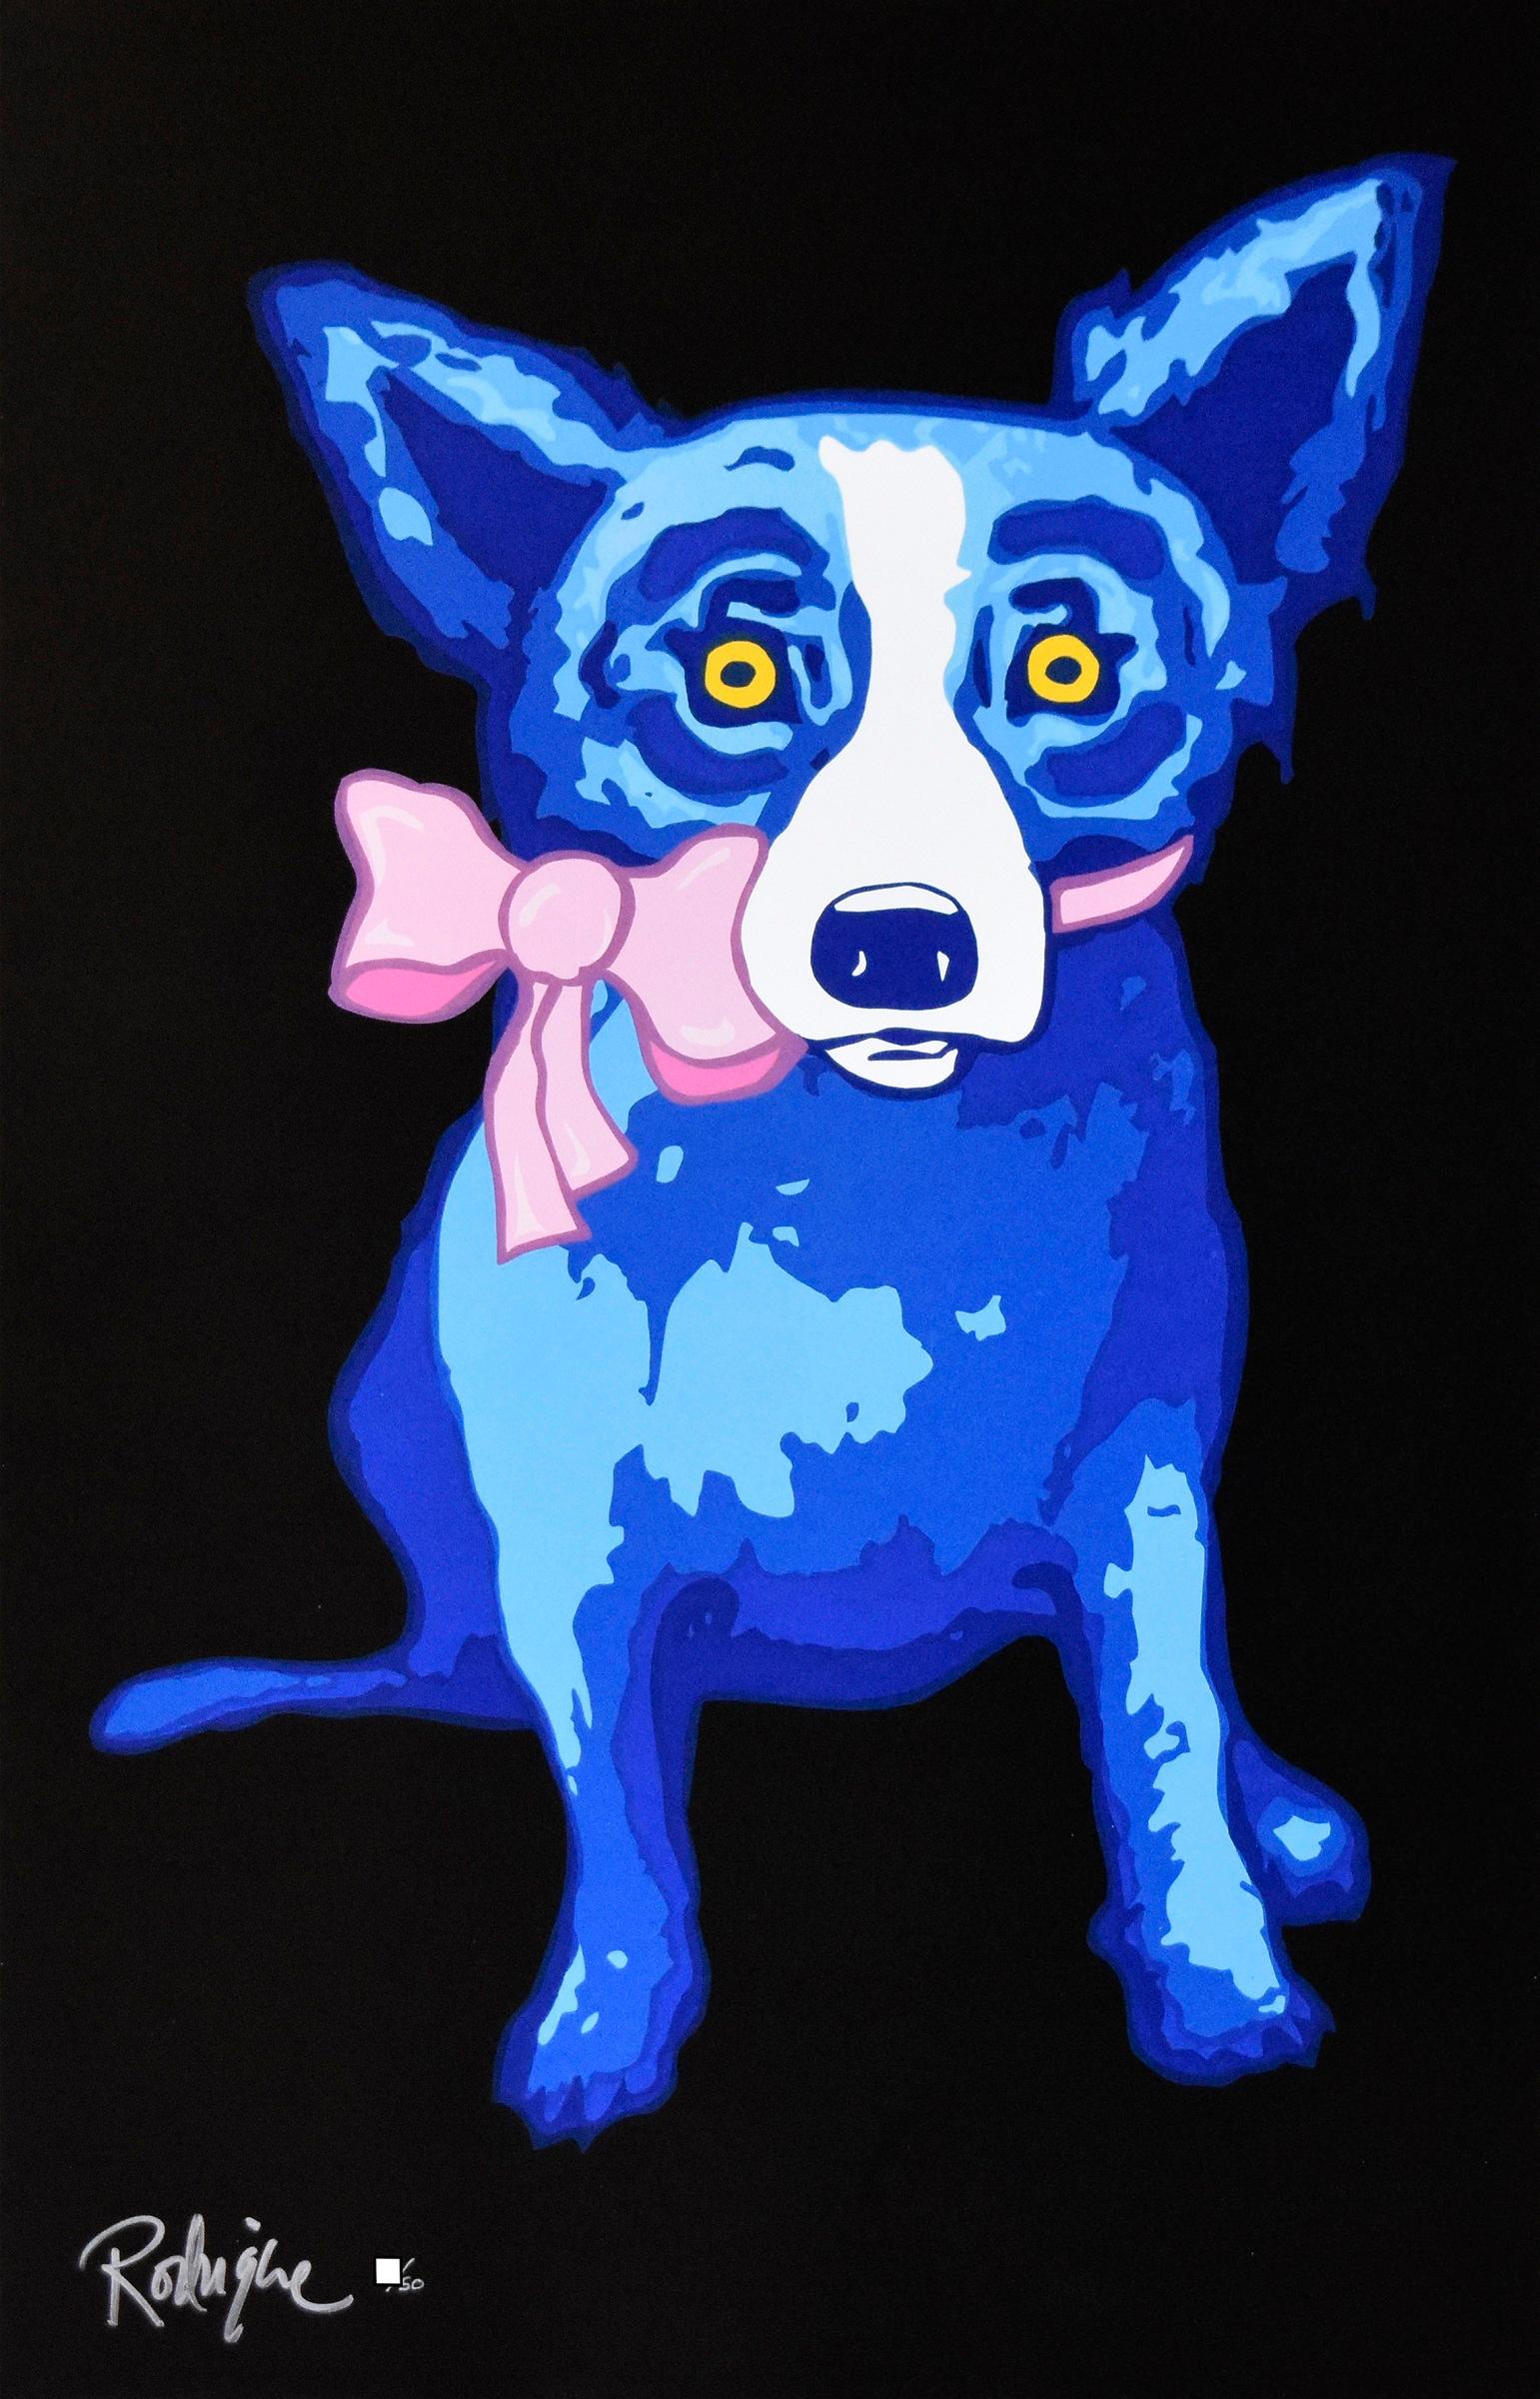 This Blue Dog work consists of a black background.  In the center of the background is a single blue dog wearing a soft pink ribbon tied into a bow around its neck.   The dog has soulful yellow eyes.  This pop art animal original silkscreen print on